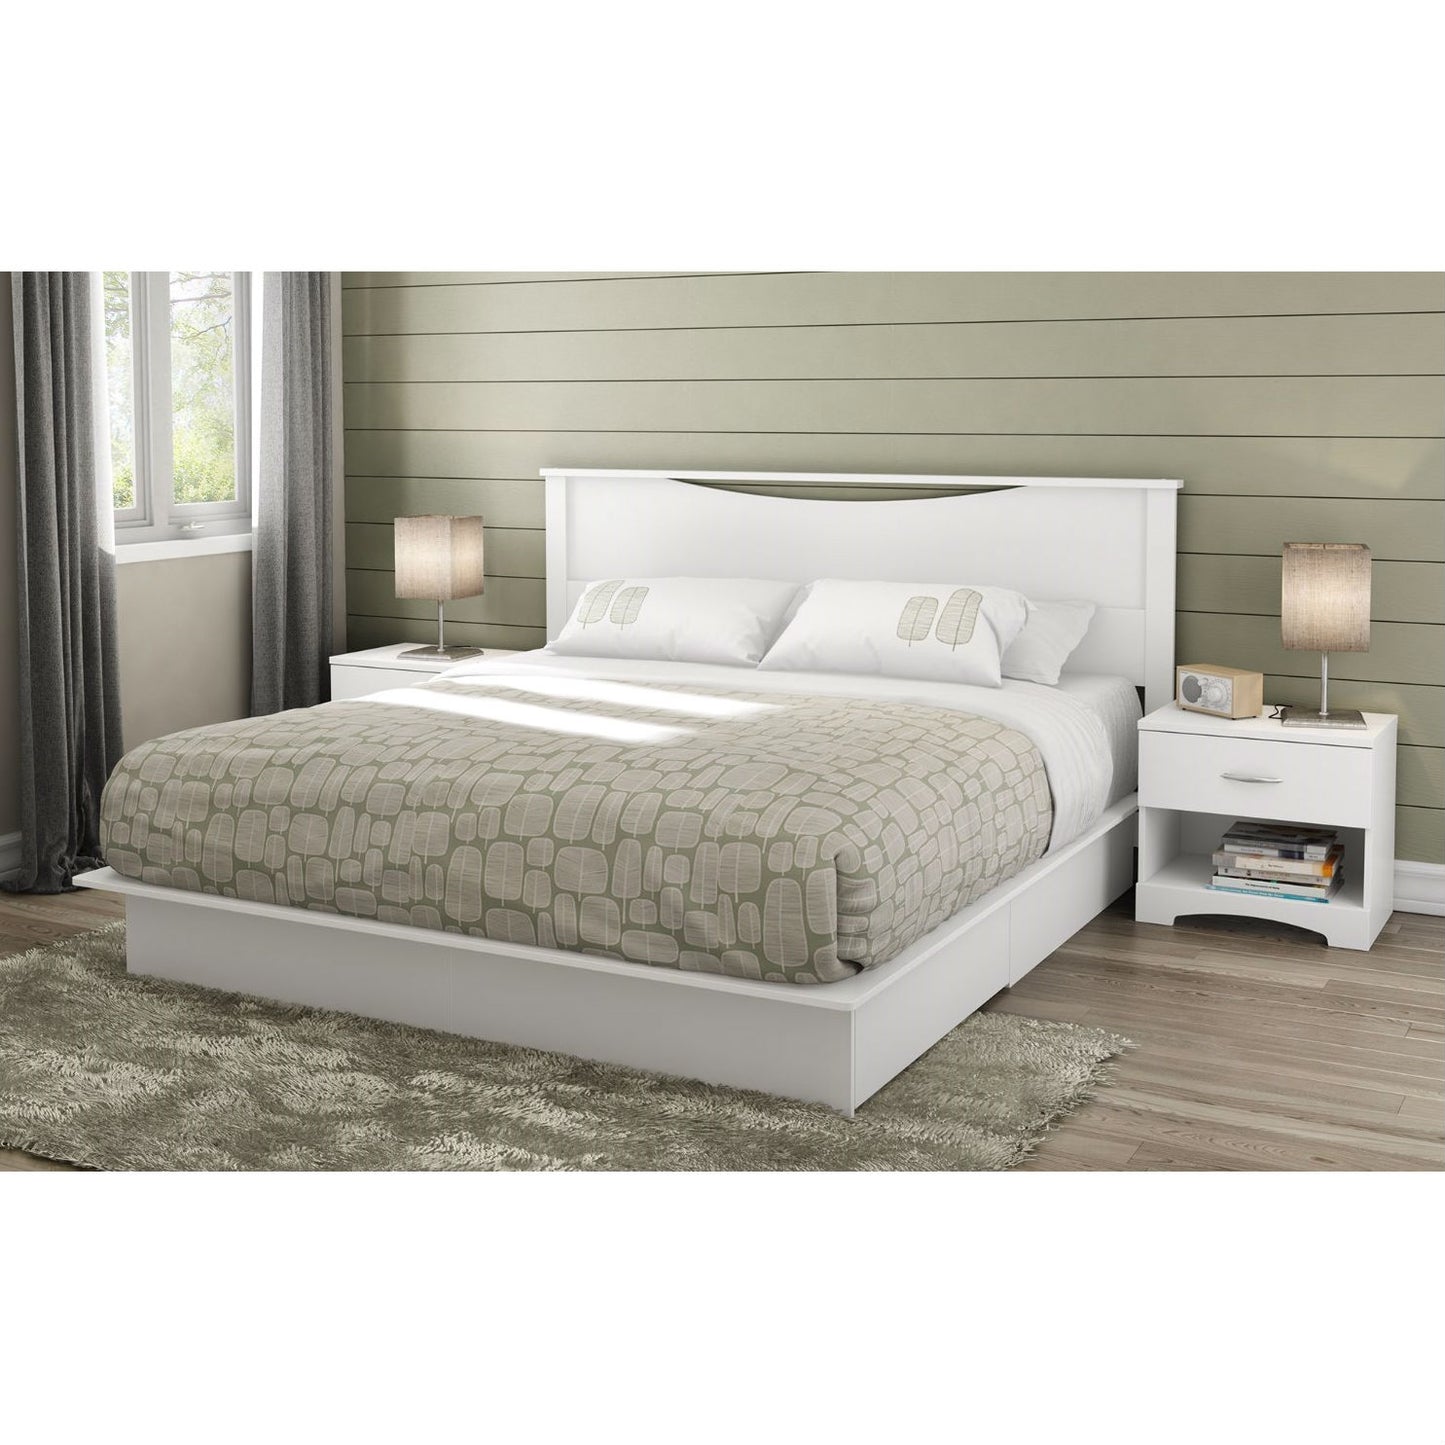 King size Contemporary Headboard in White Wood Finish